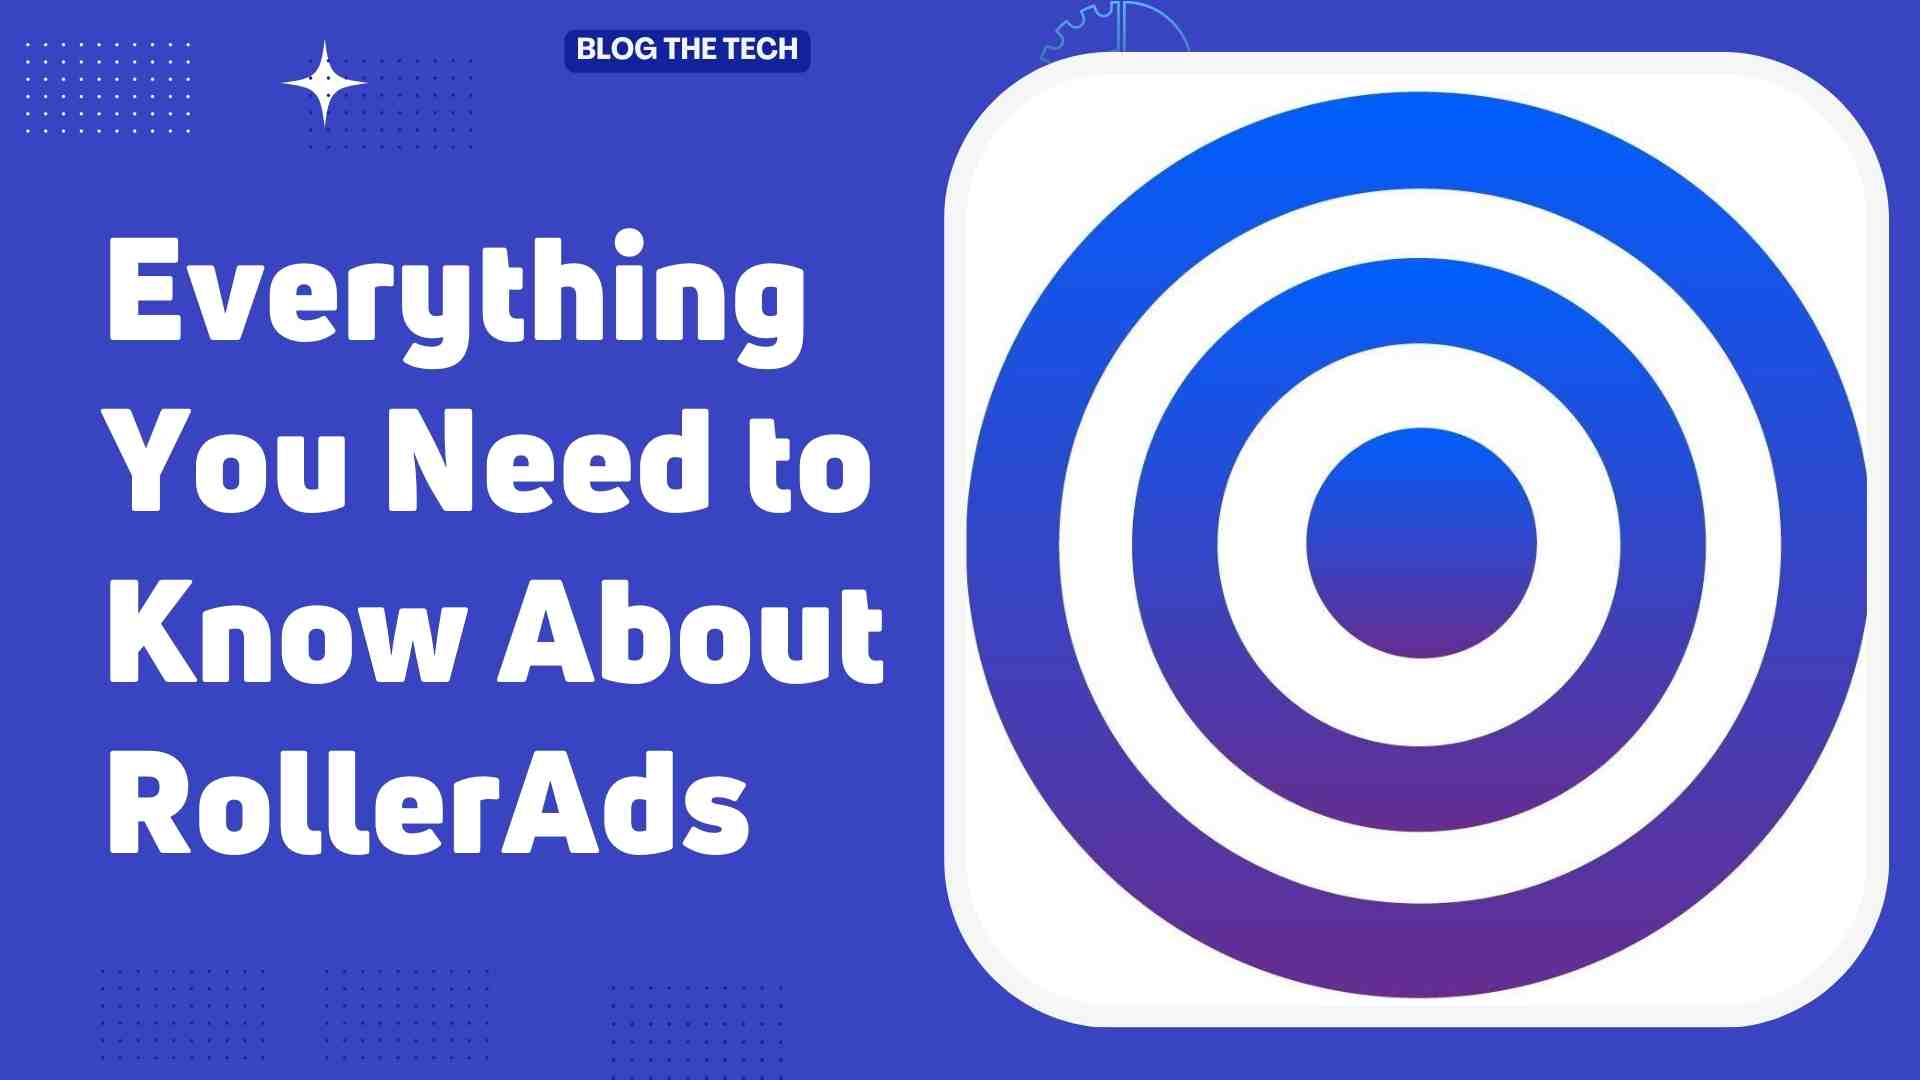 Everything You Need to Know About RollerAds